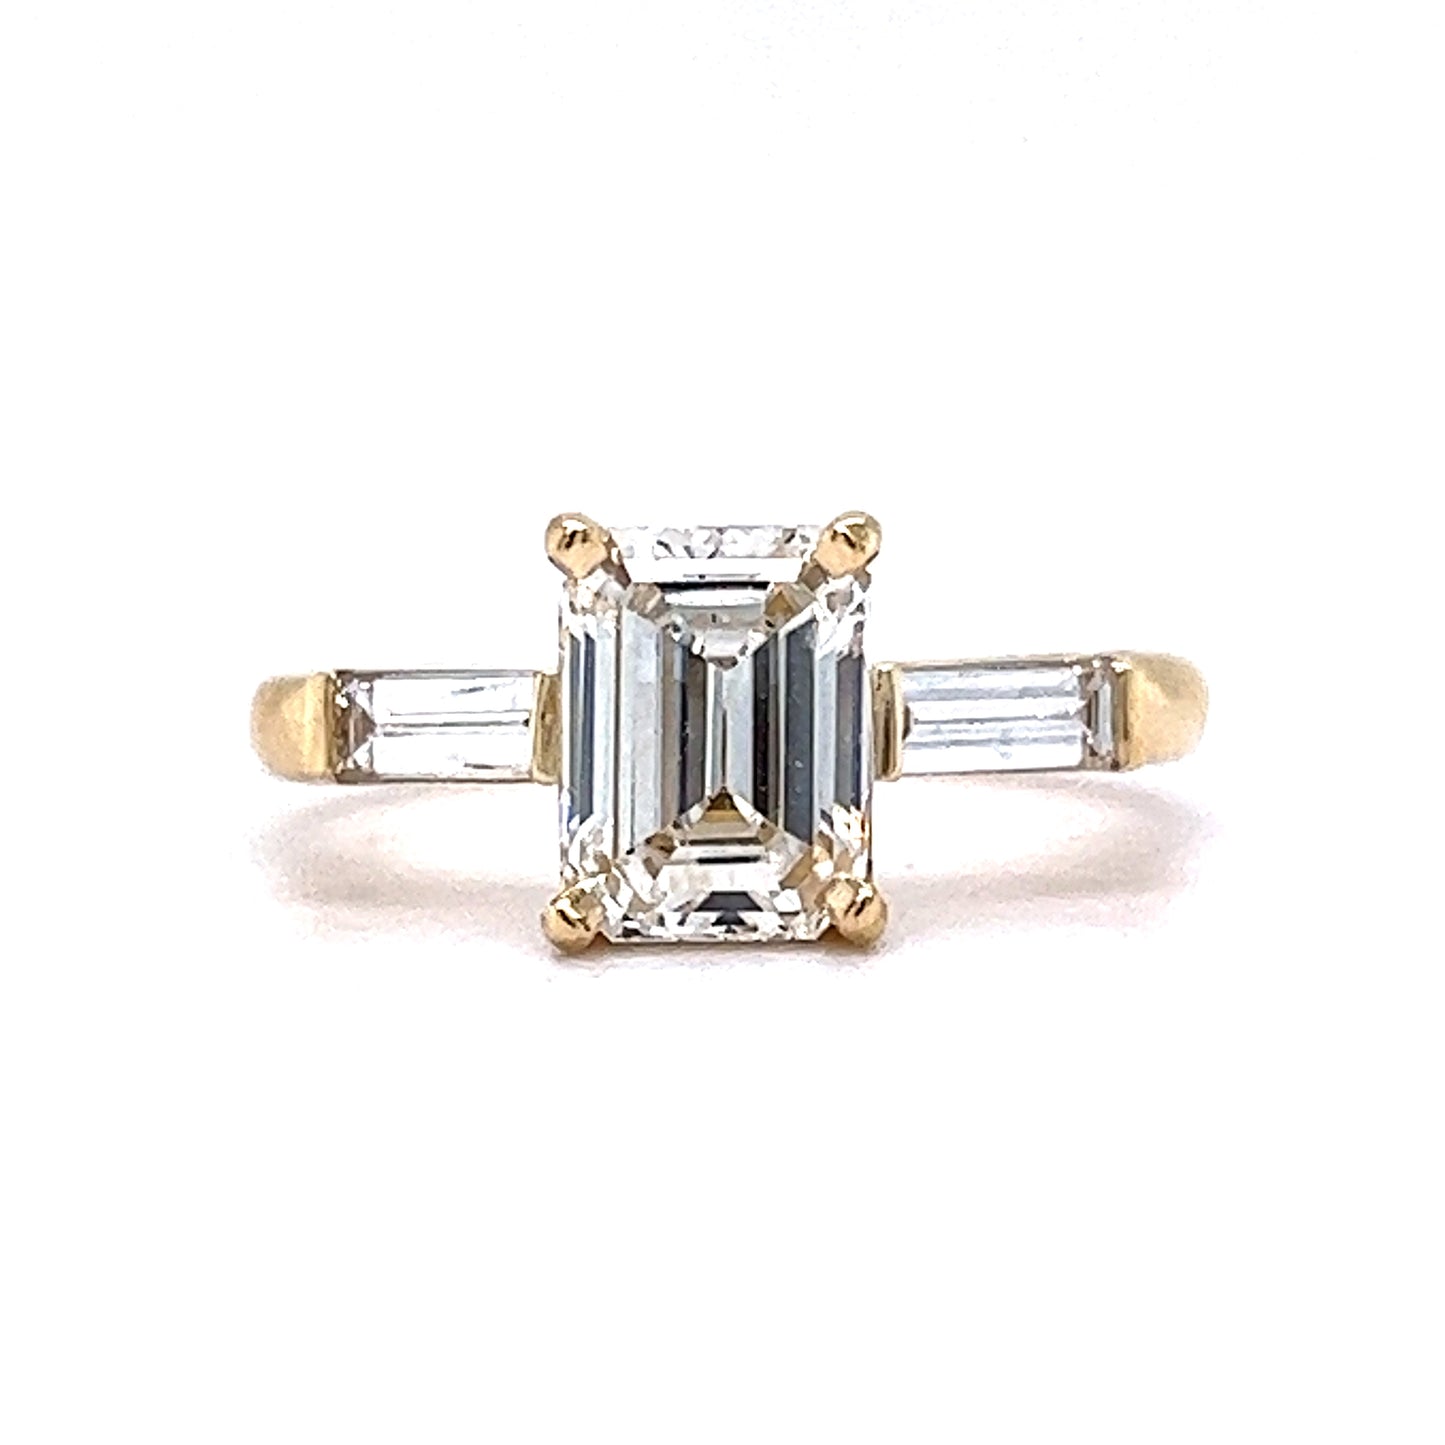 1.57 Emerald Cut Engagement Ring in 14k Yellow Gold